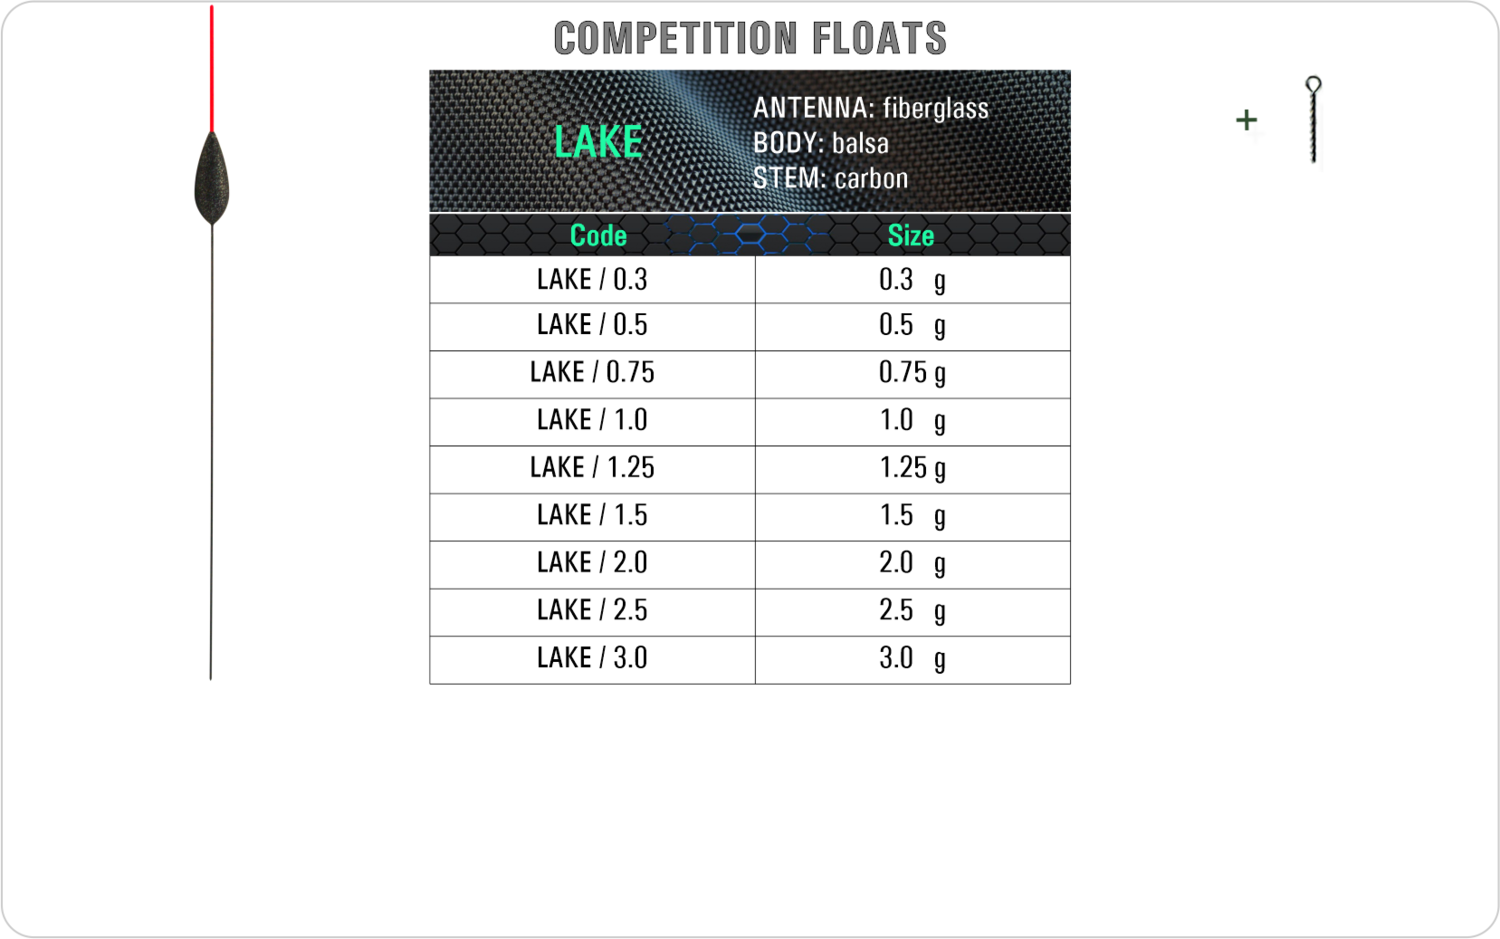 LAKE Competition float model and table containing an additional information about this float with different codes, sizes, types of the body, the stem and the antenna of the float.